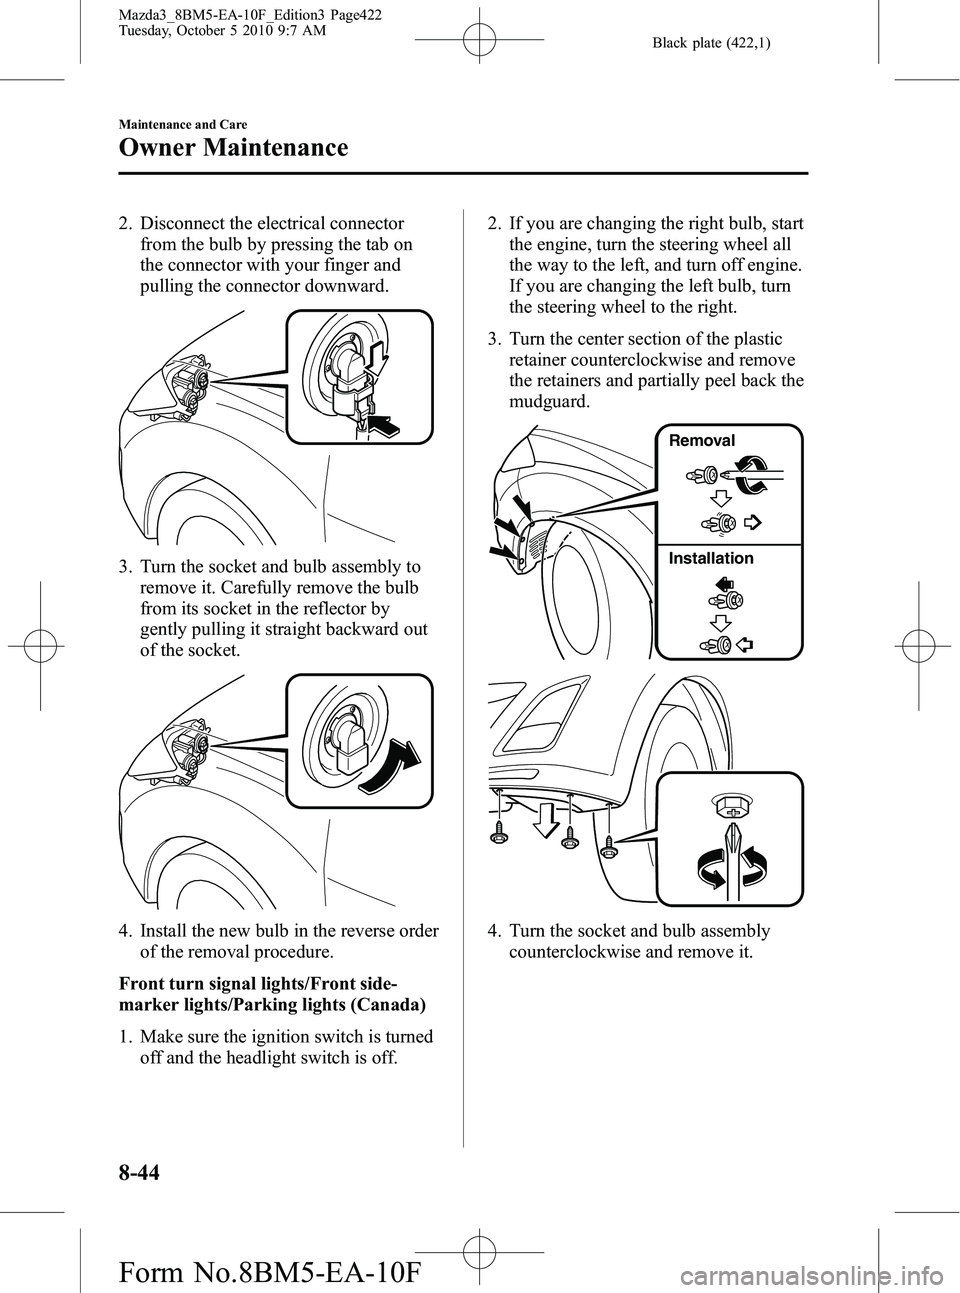 MAZDA MODEL 3 5-DOOR 2011  Owners Manual Black plate (422,1)
2. Disconnect the electrical connectorfrom the bulb by pressing the tab on
the connector with your finger and
pulling the connector downward.
3. Turn the socket and bulb assembly t